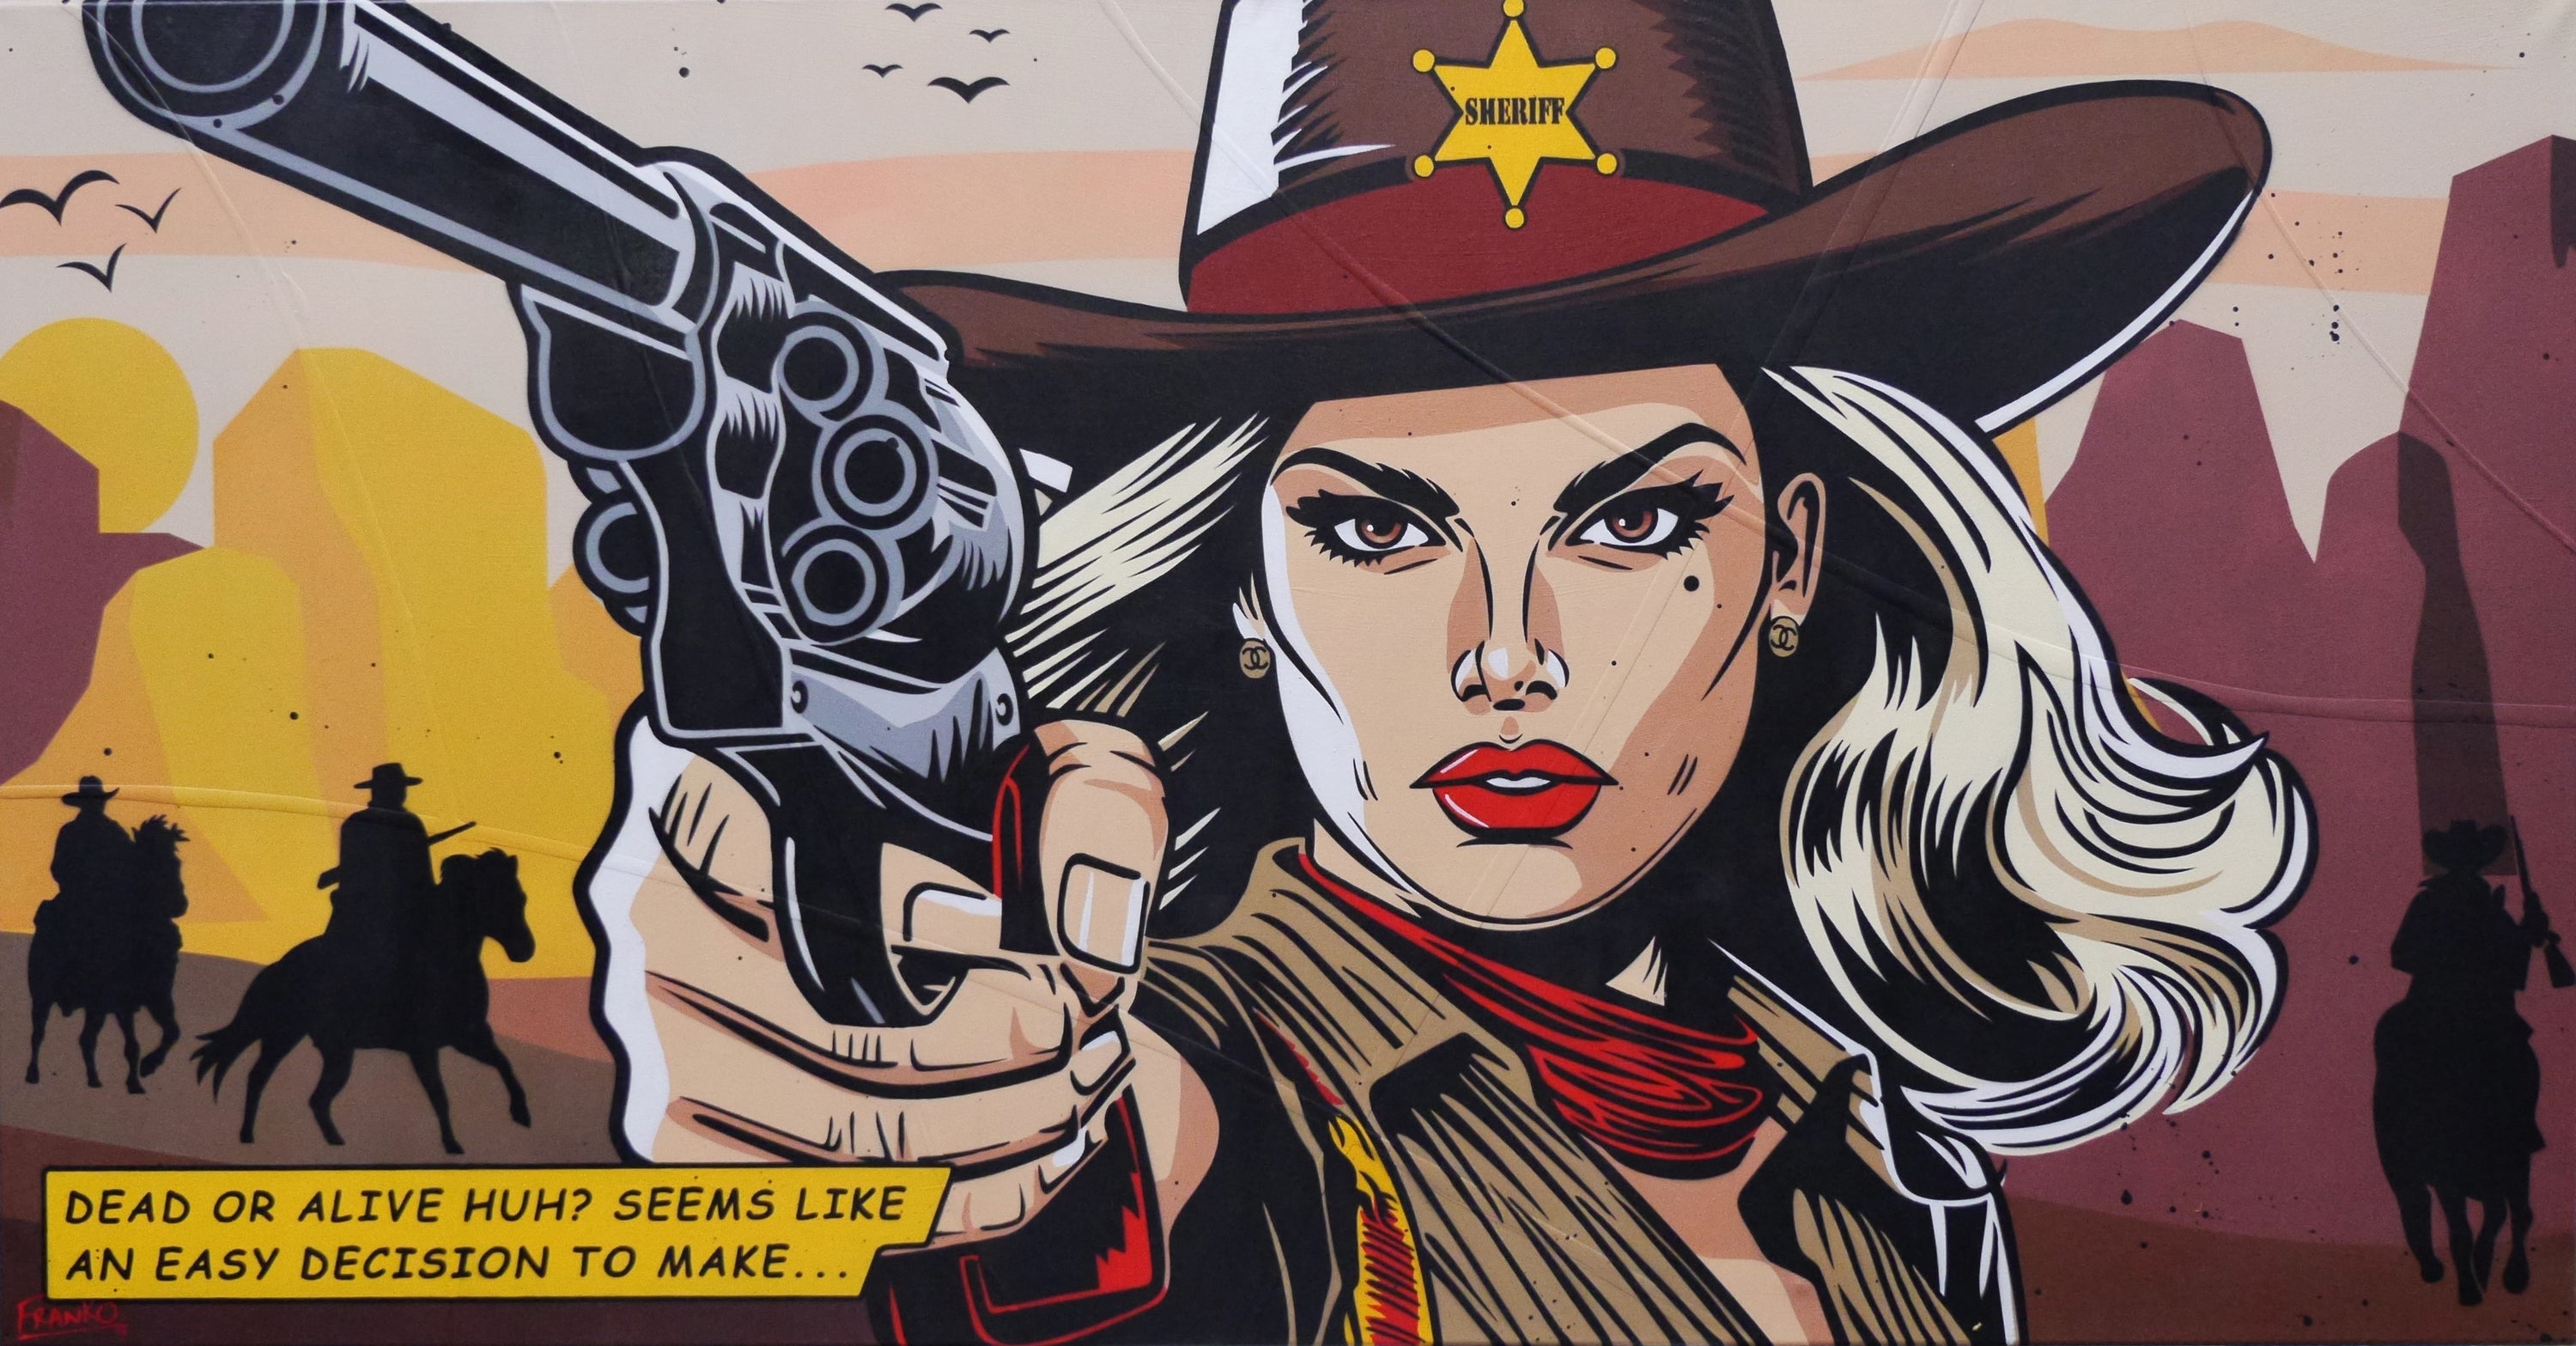 The Sheriff 190cm x 100cm Cowgirl Textured Classic Pop Art Painting (SOLD)